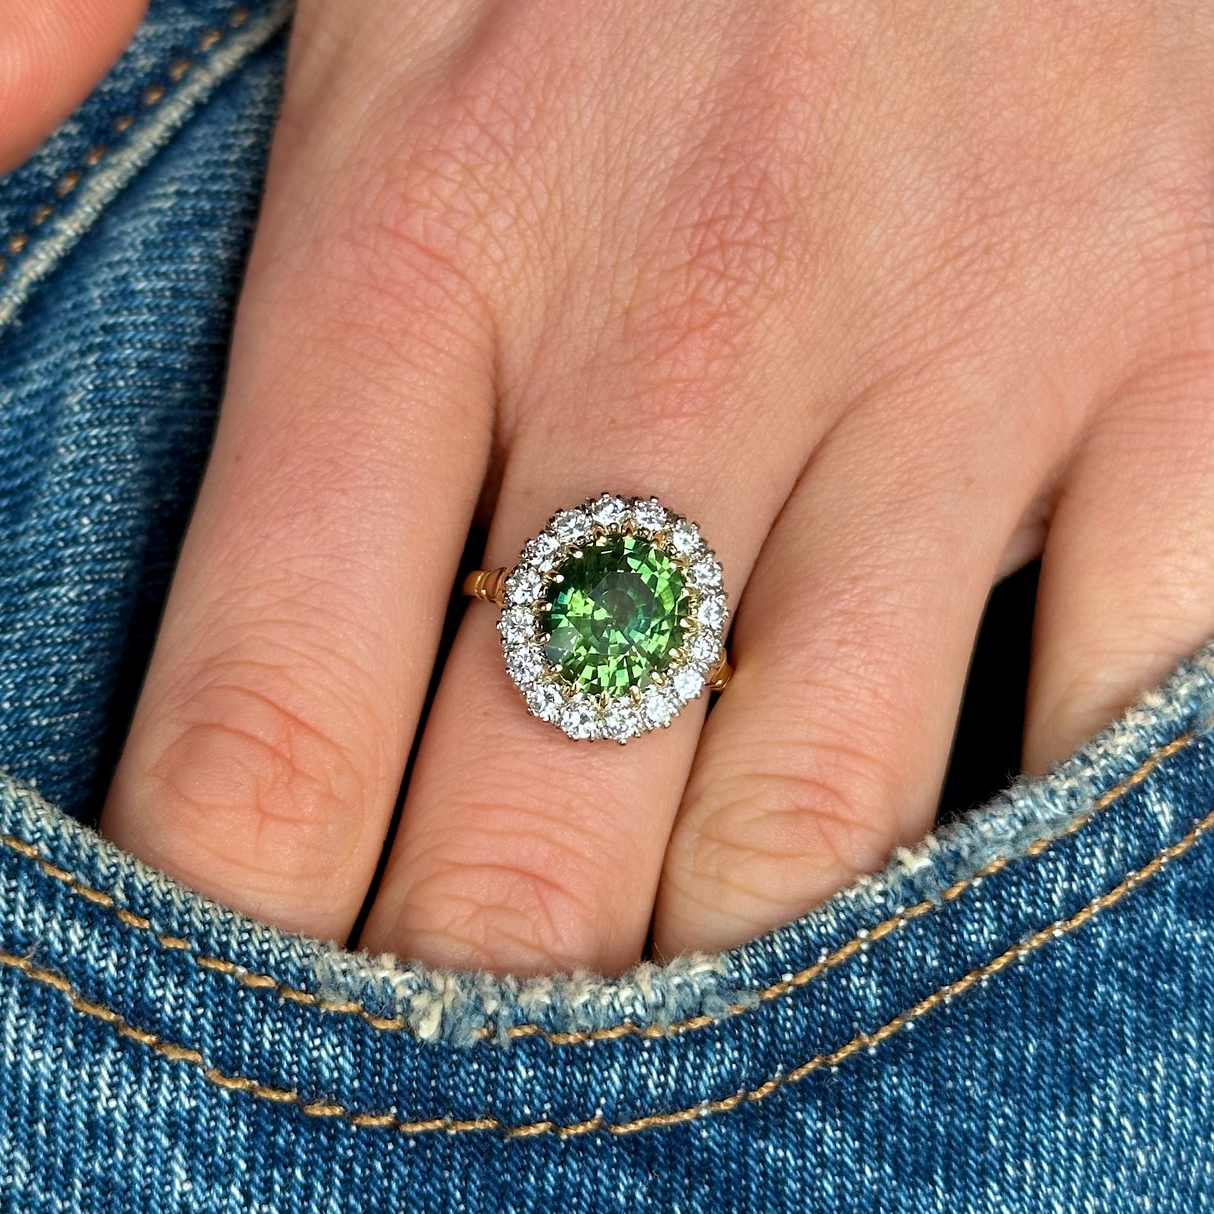 Vintage, 5ct Green Sapphire and Diamond Cluster Ring, 18ct Yellow Gold worn on hand in pocket of jeans.